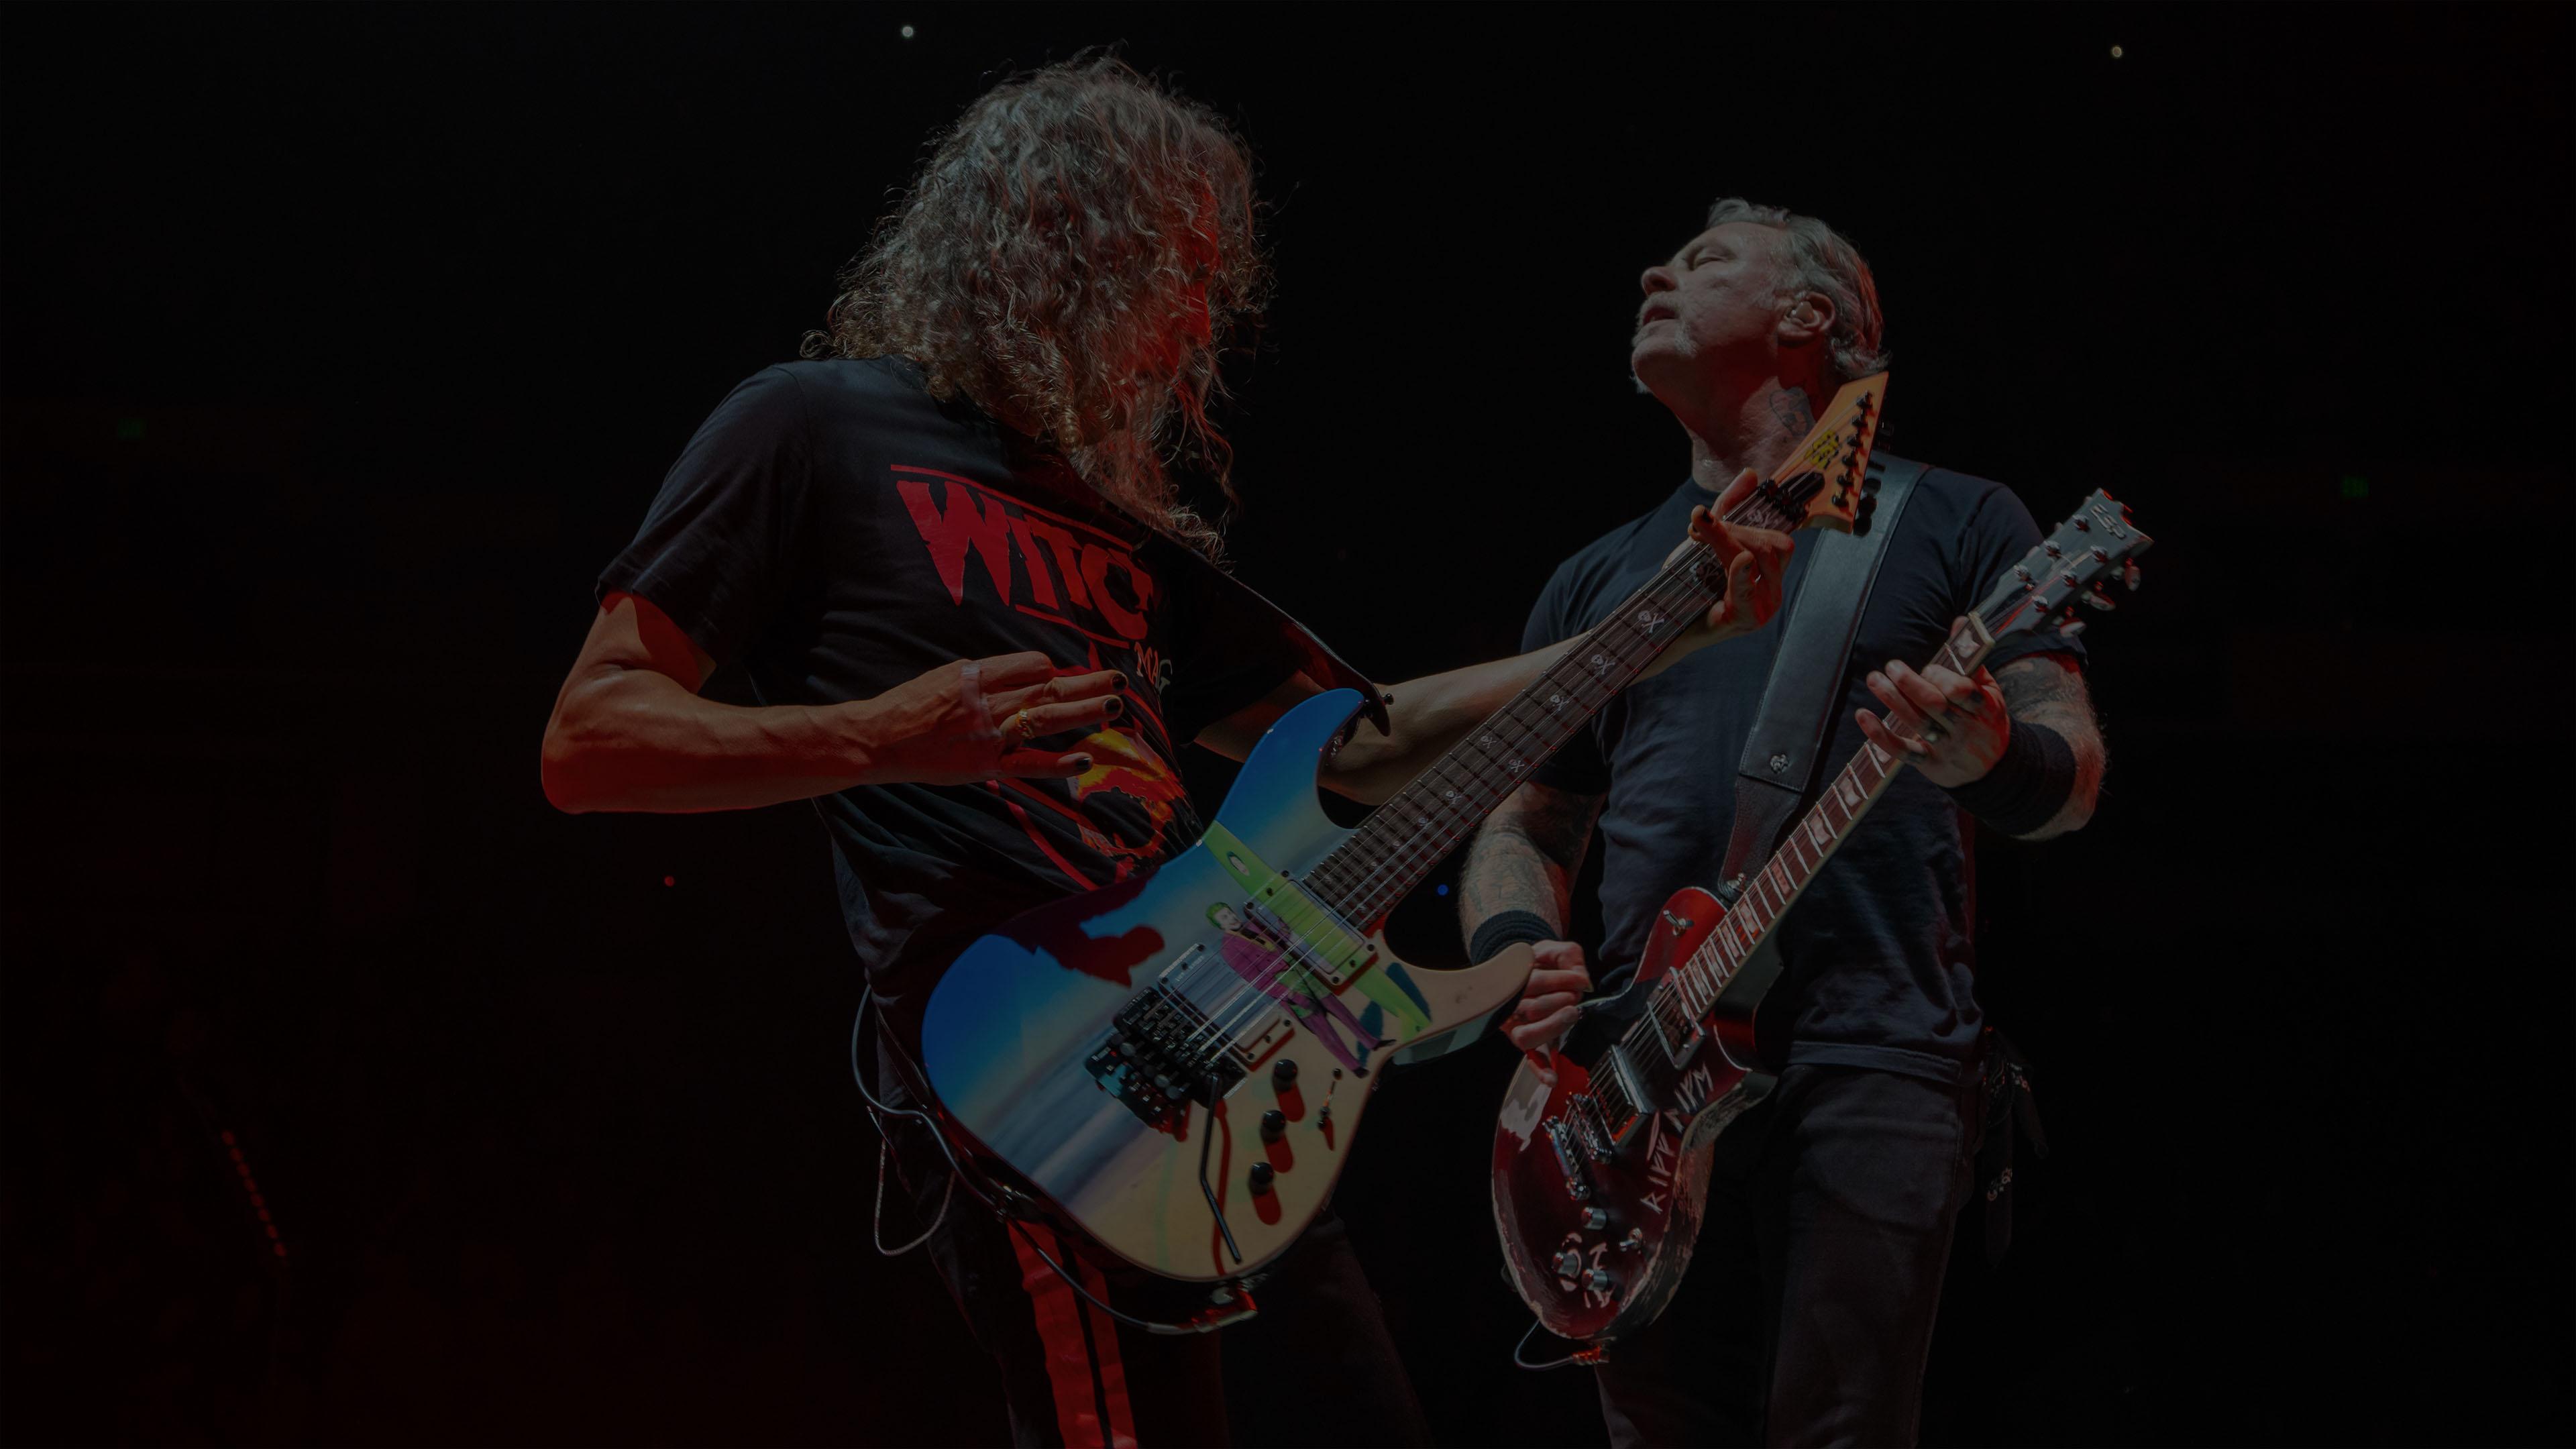 Banner Image for the photo gallery from the gig in Birmingham, AL shot on January 22, 2019